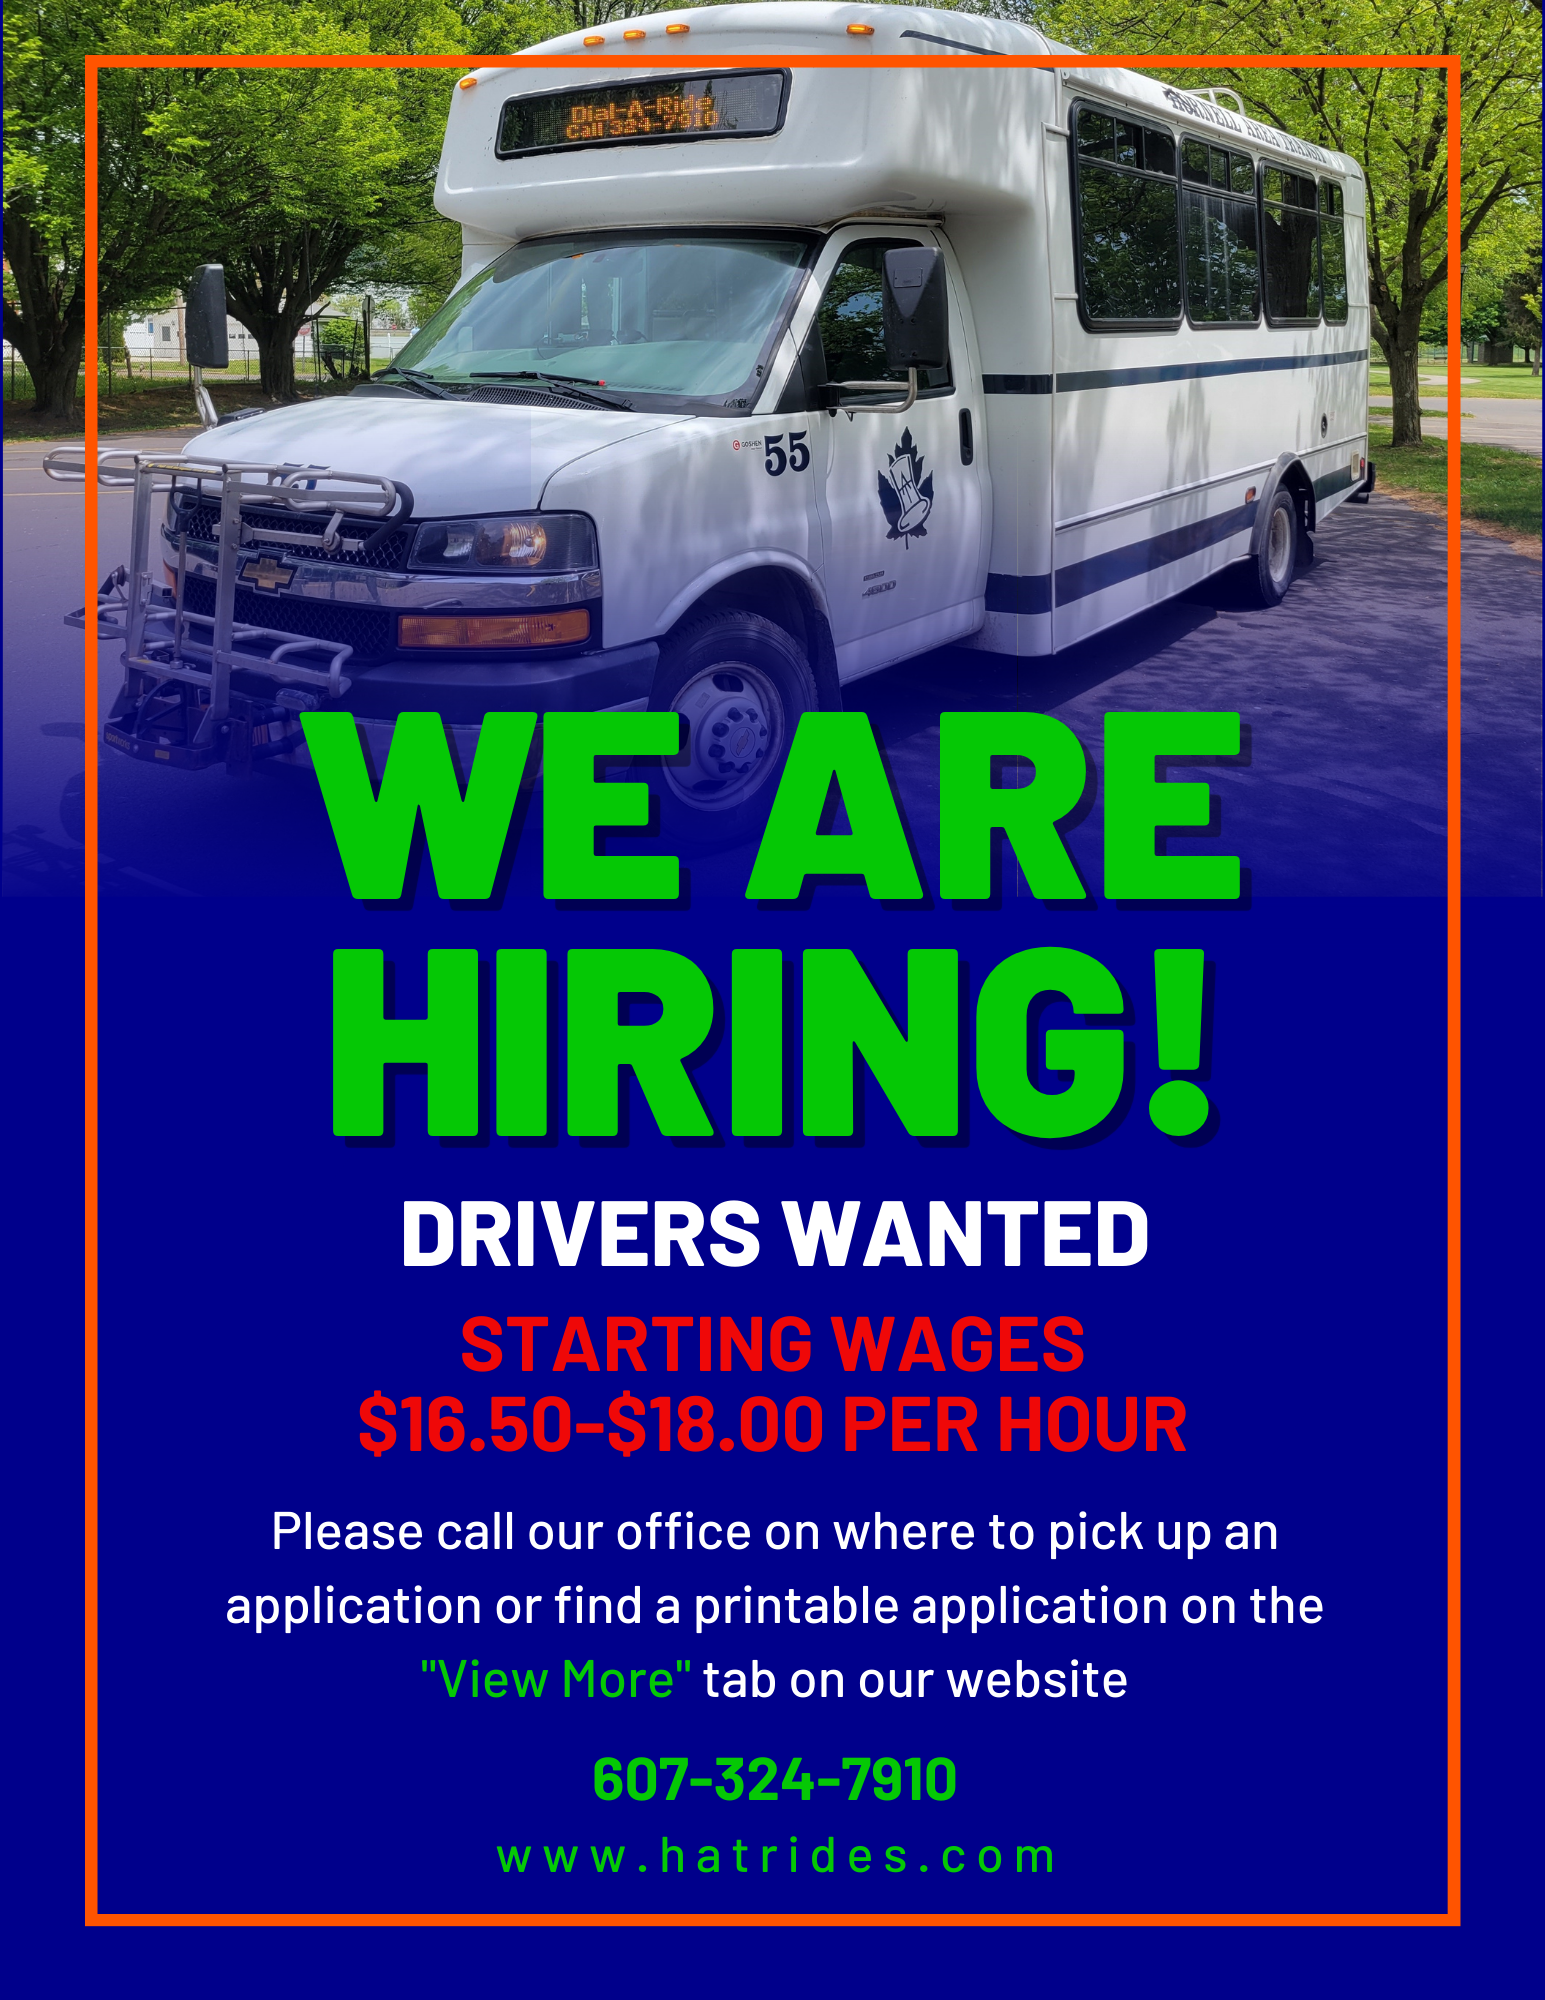 We're Hiring! Drivers Wanted.  Starting wages $16.50-18.00 per hour.  Please call our office on where to pick up an application  or find a printable application on this page.